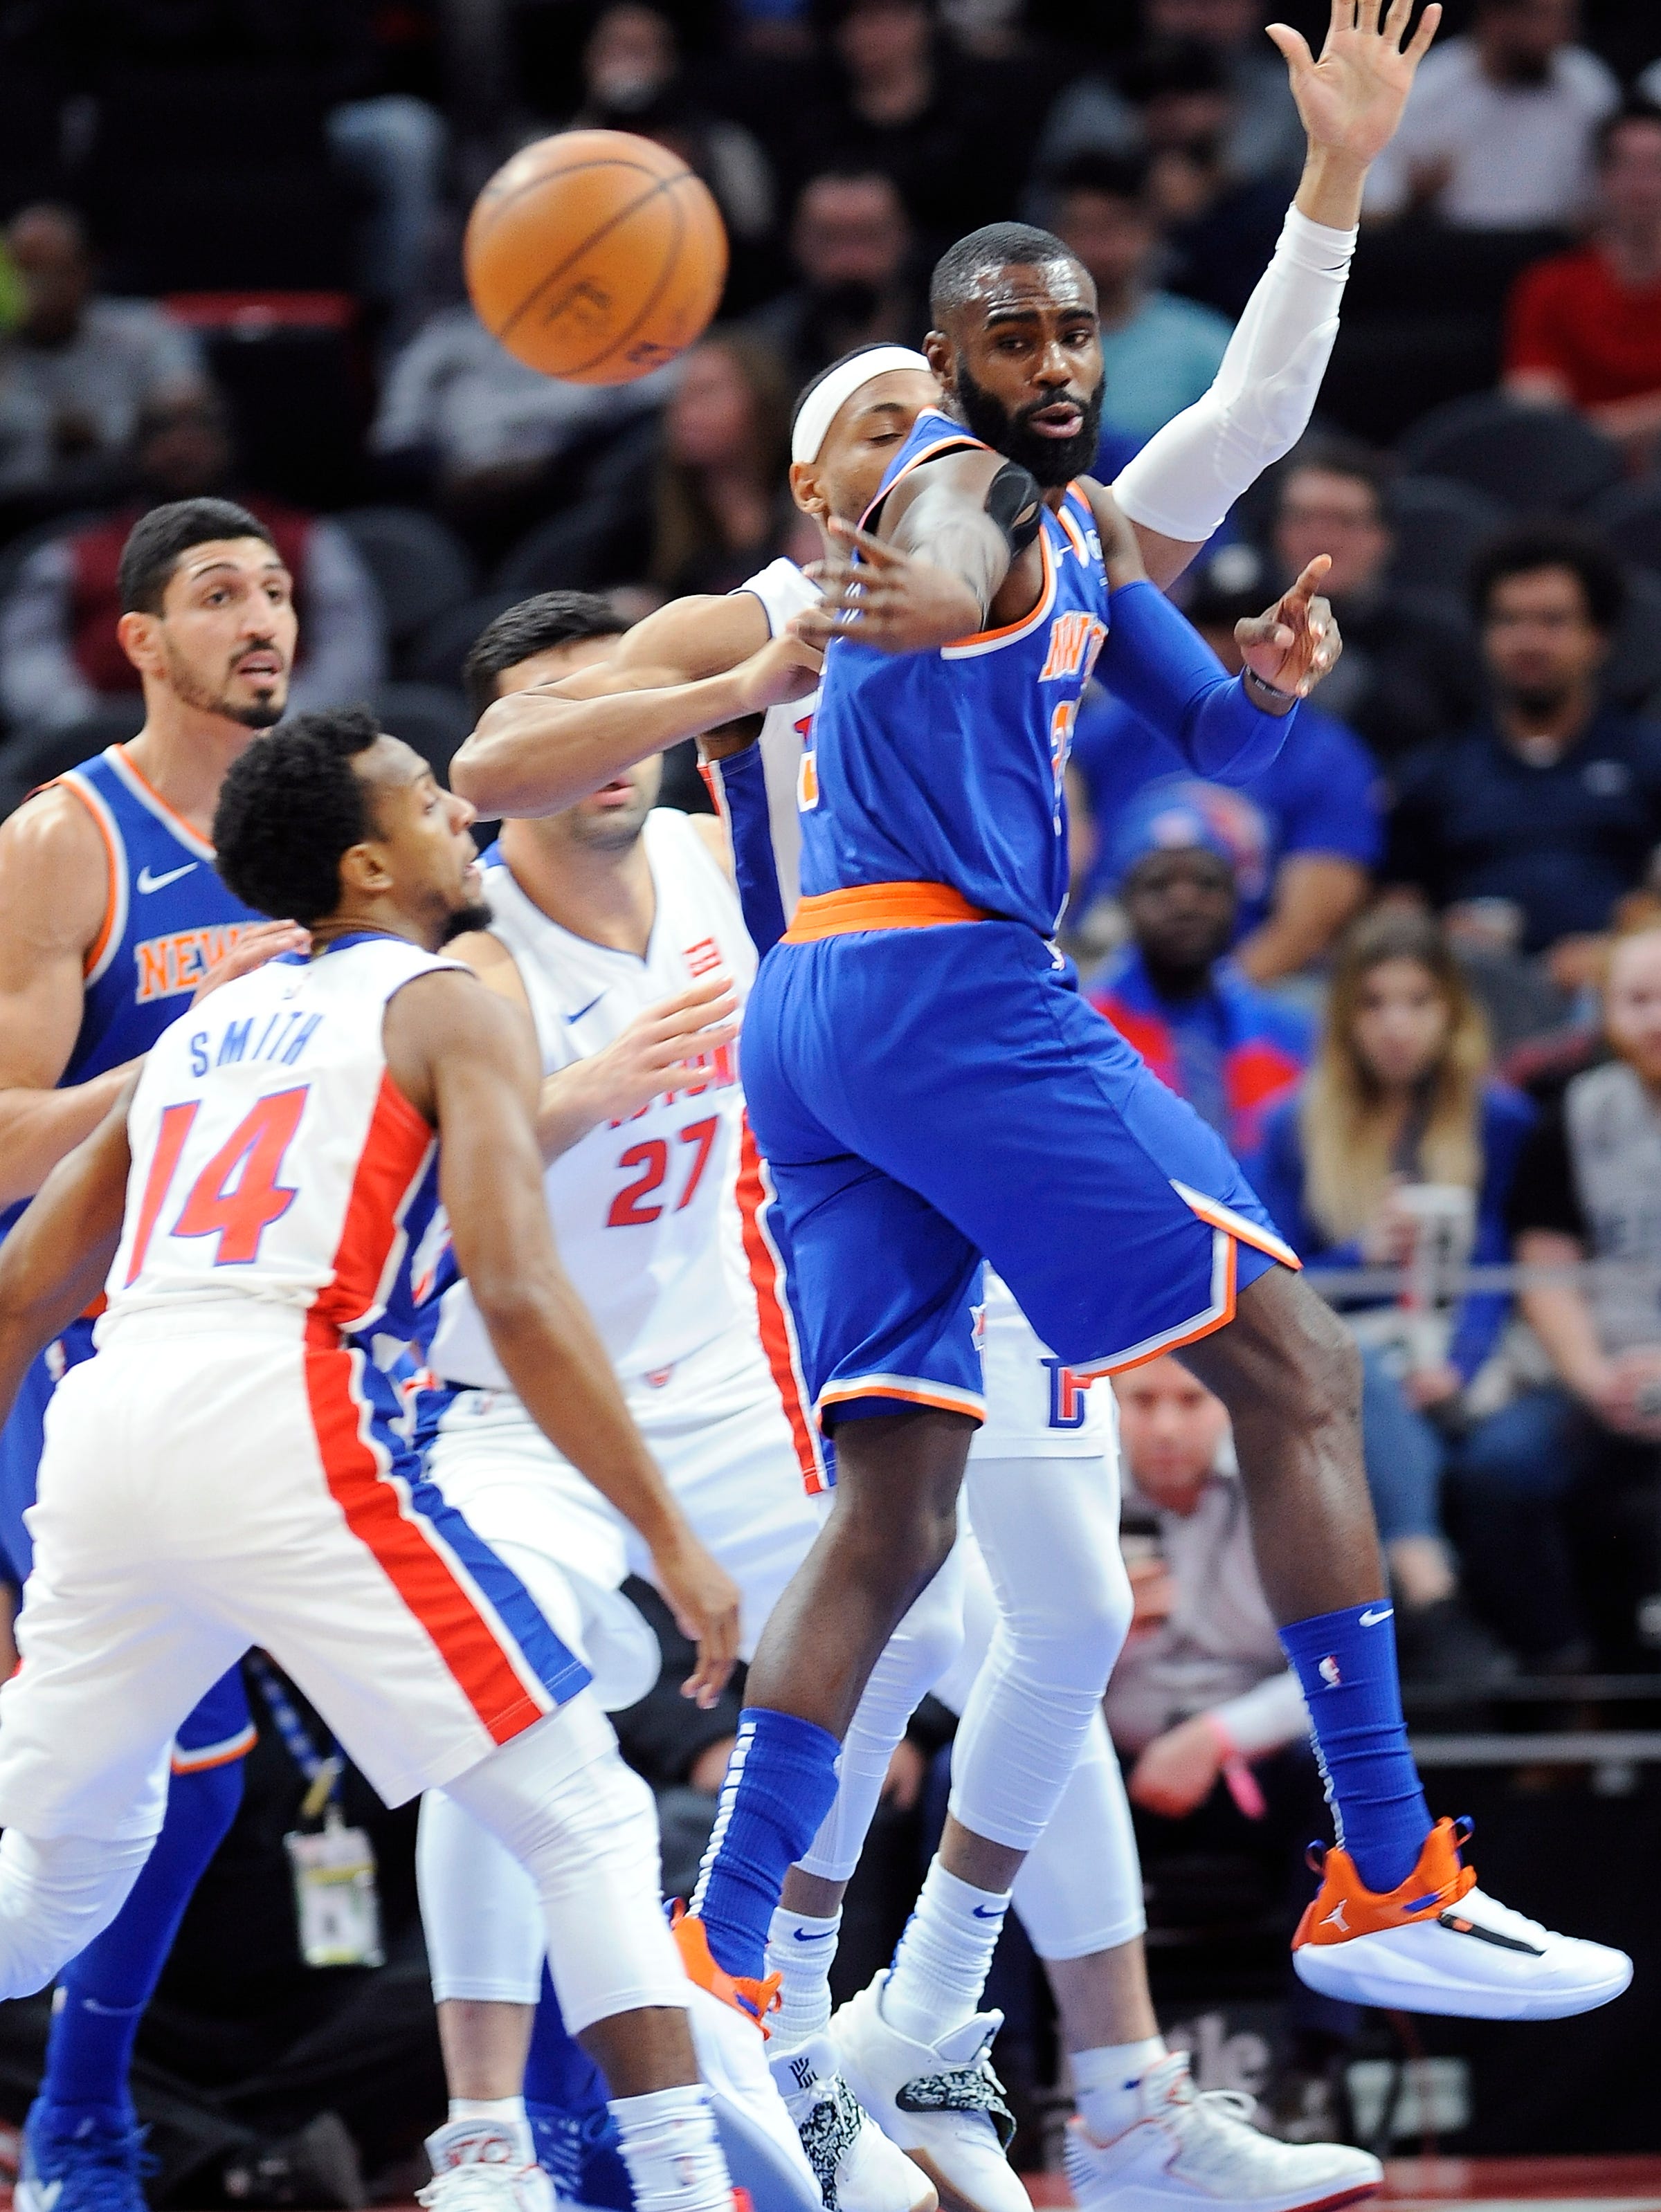 Knicks' Tim Hardaway Jr. makes a pass in front of Pistons' Bruce Brown in the first quarter.